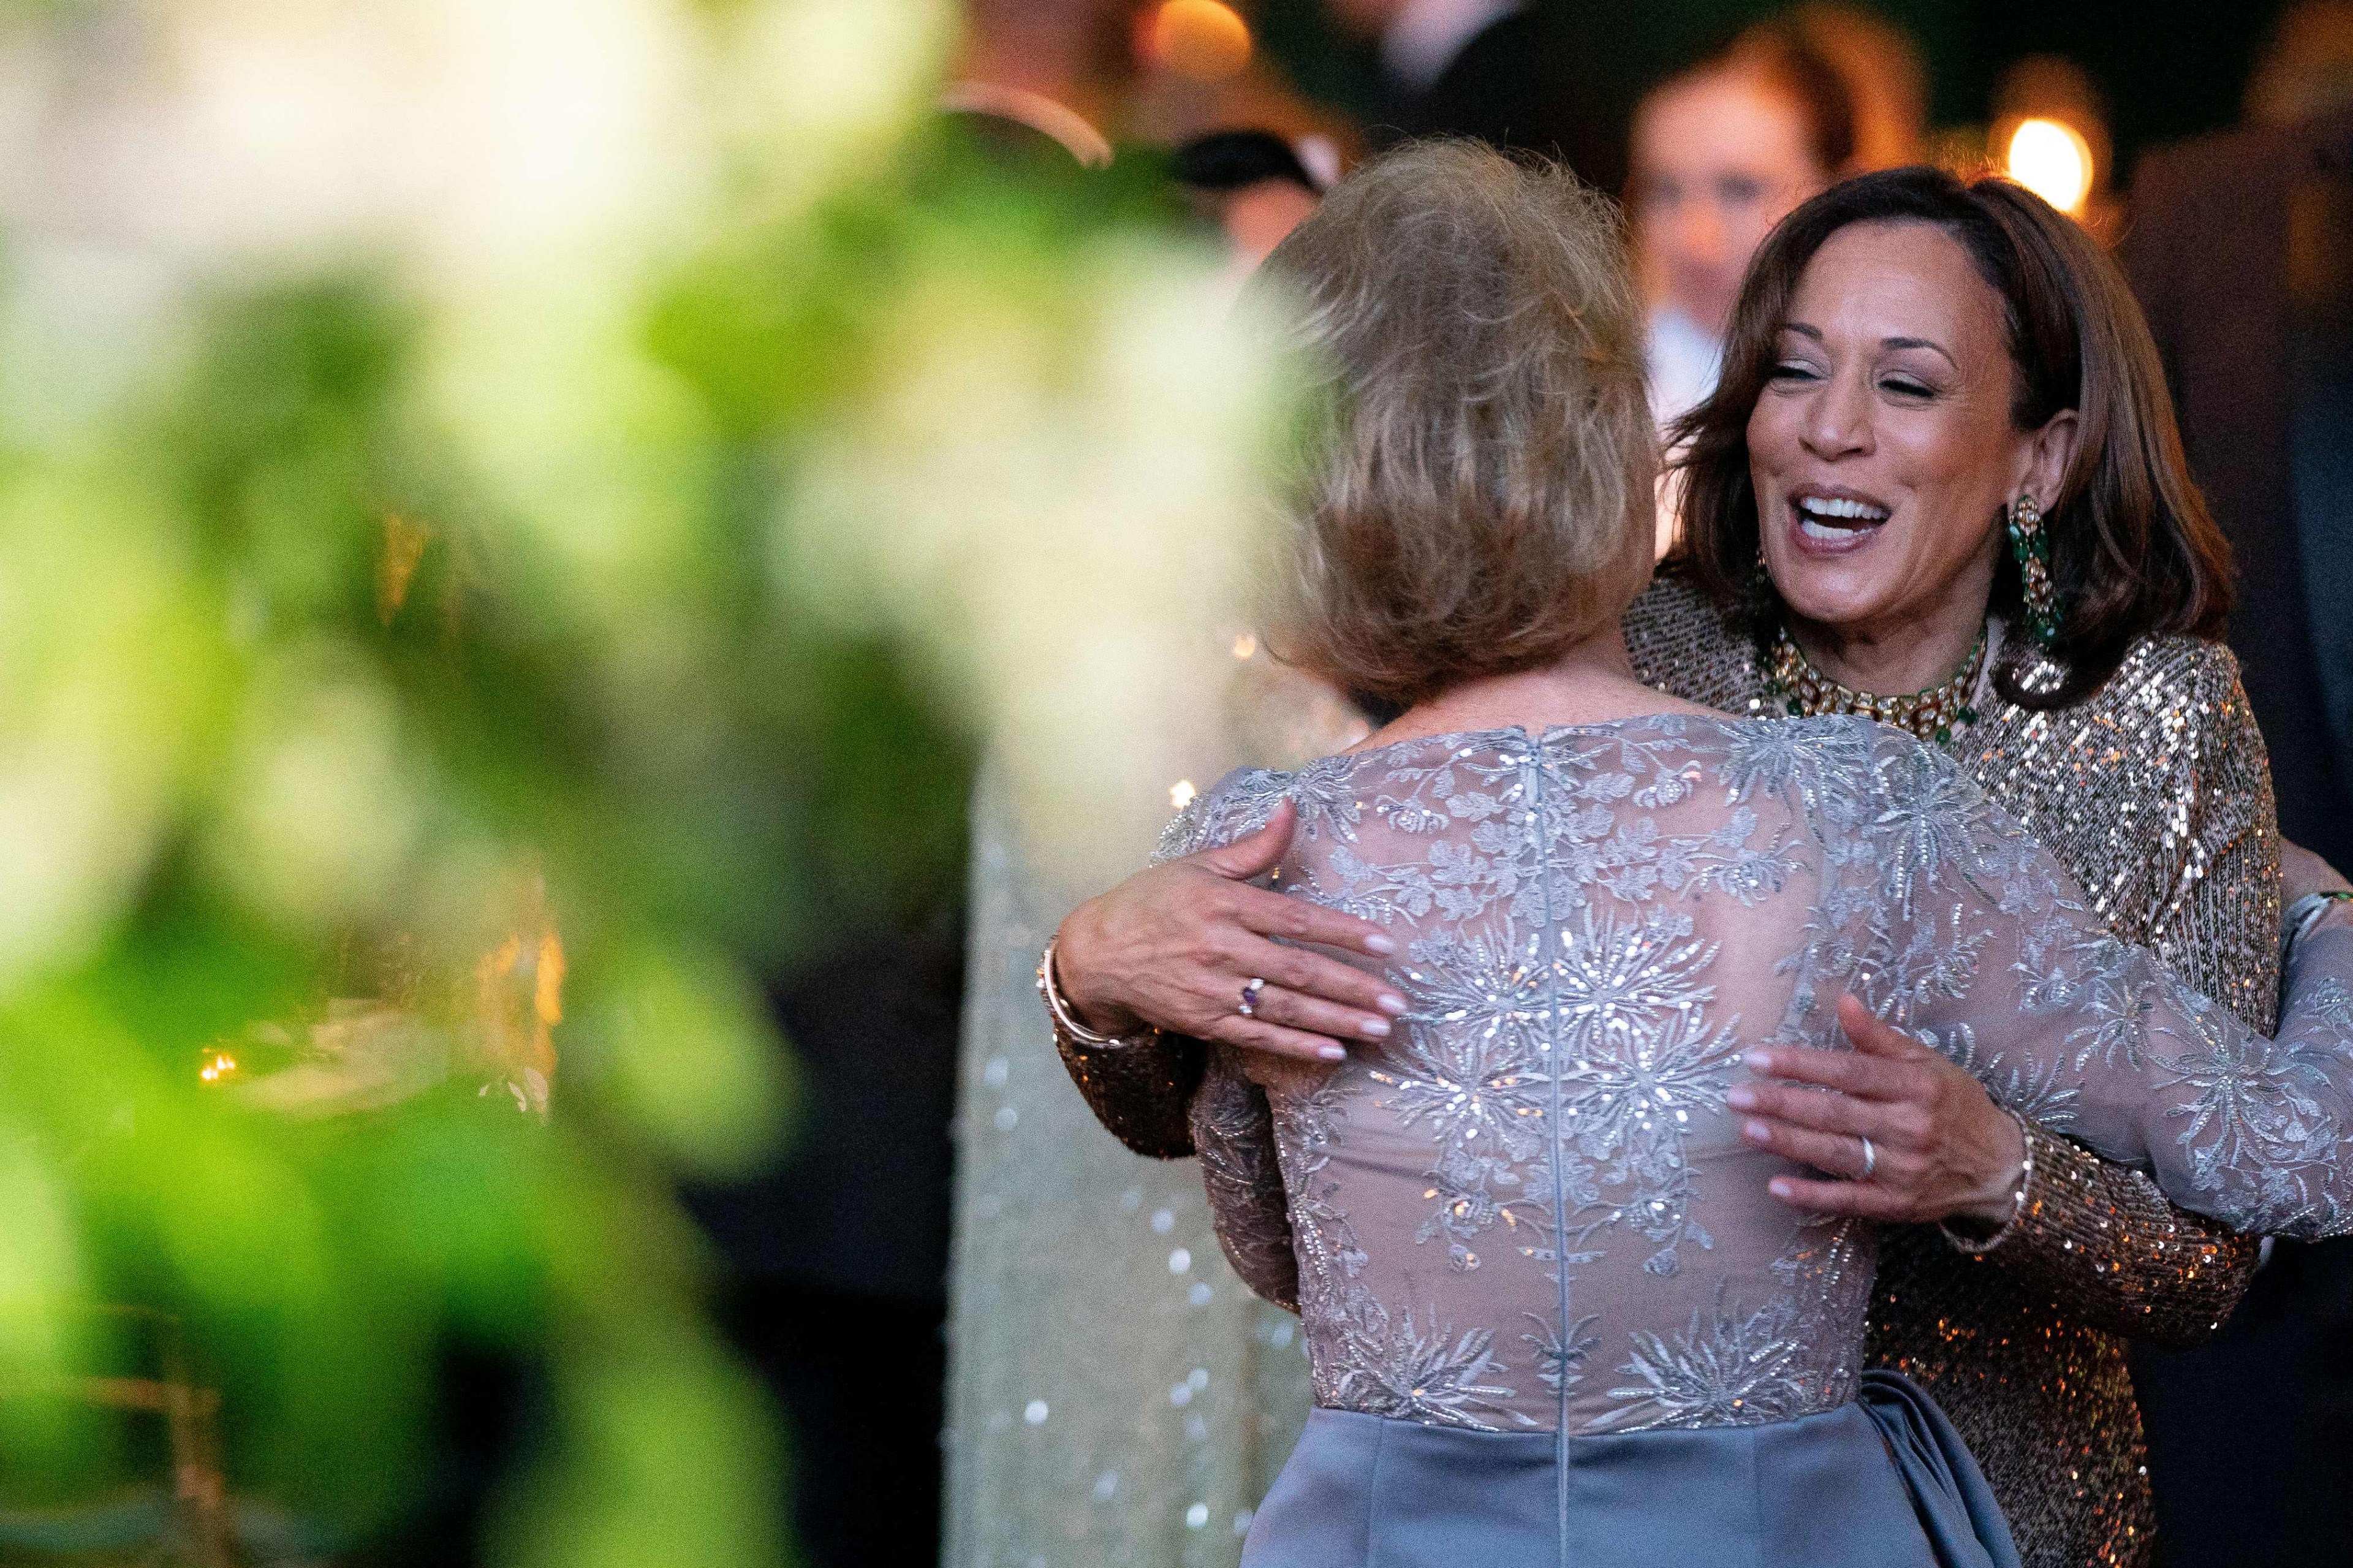 US Vice President Kamala Harris wearing formal wear smiles while she hugs an unidentifiable woman, also wearing formal wear, in a formal dining room setting with an out of focus flower arrangment in the foreground.